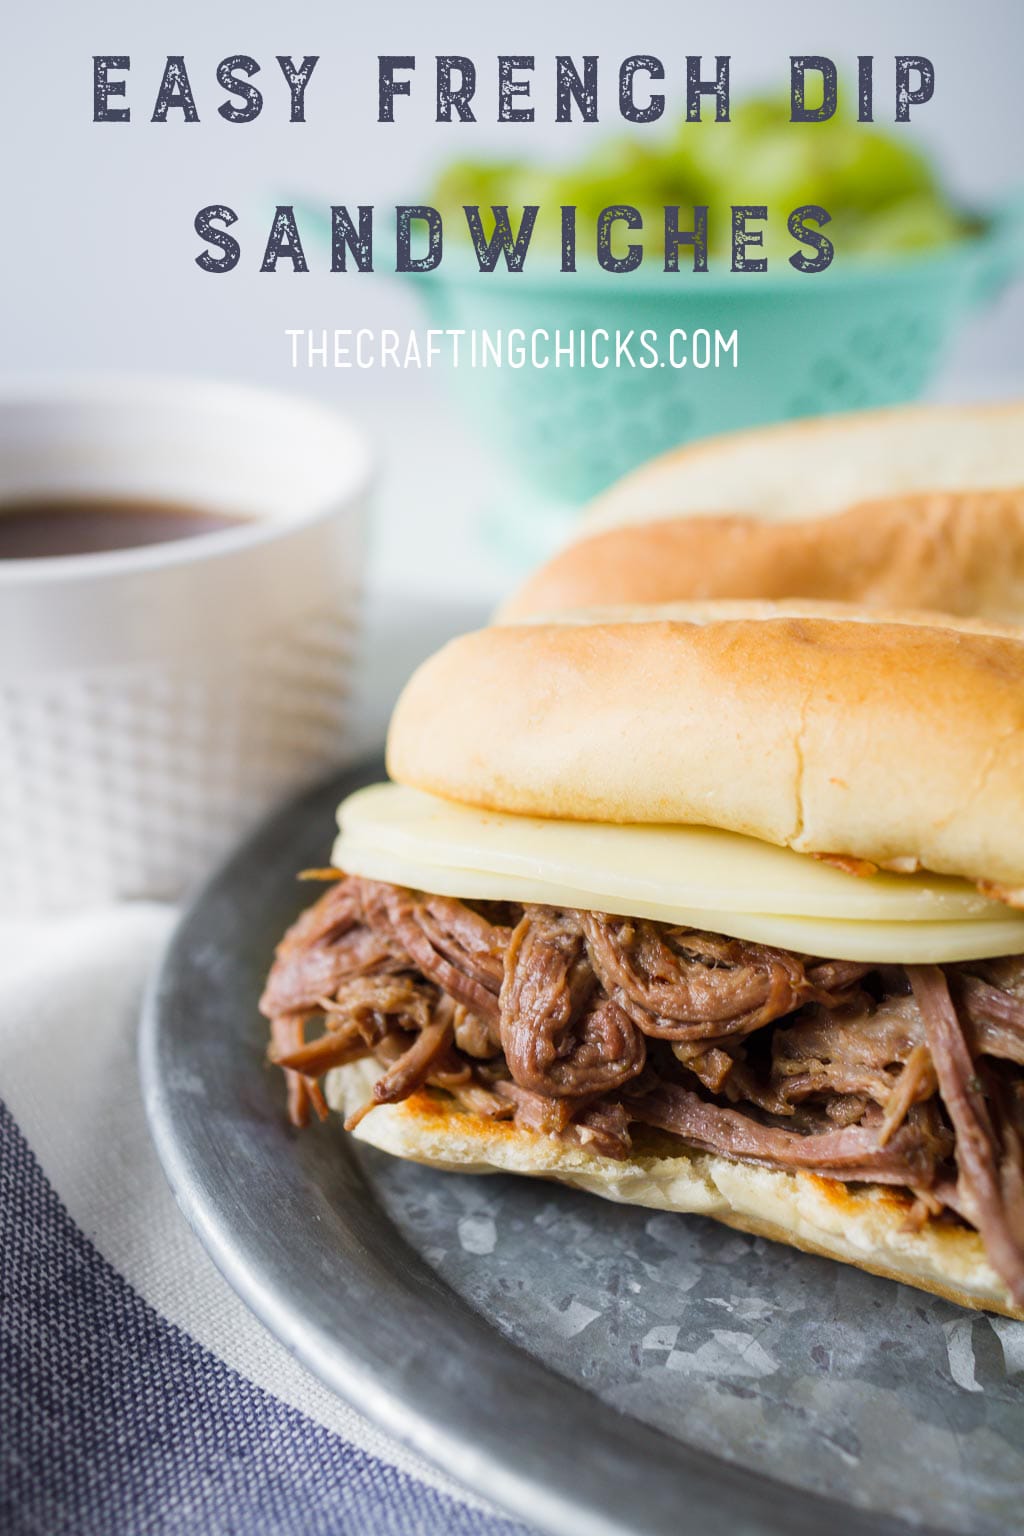 Easy French Dip Sandwiches in the crockpot or slow cooker